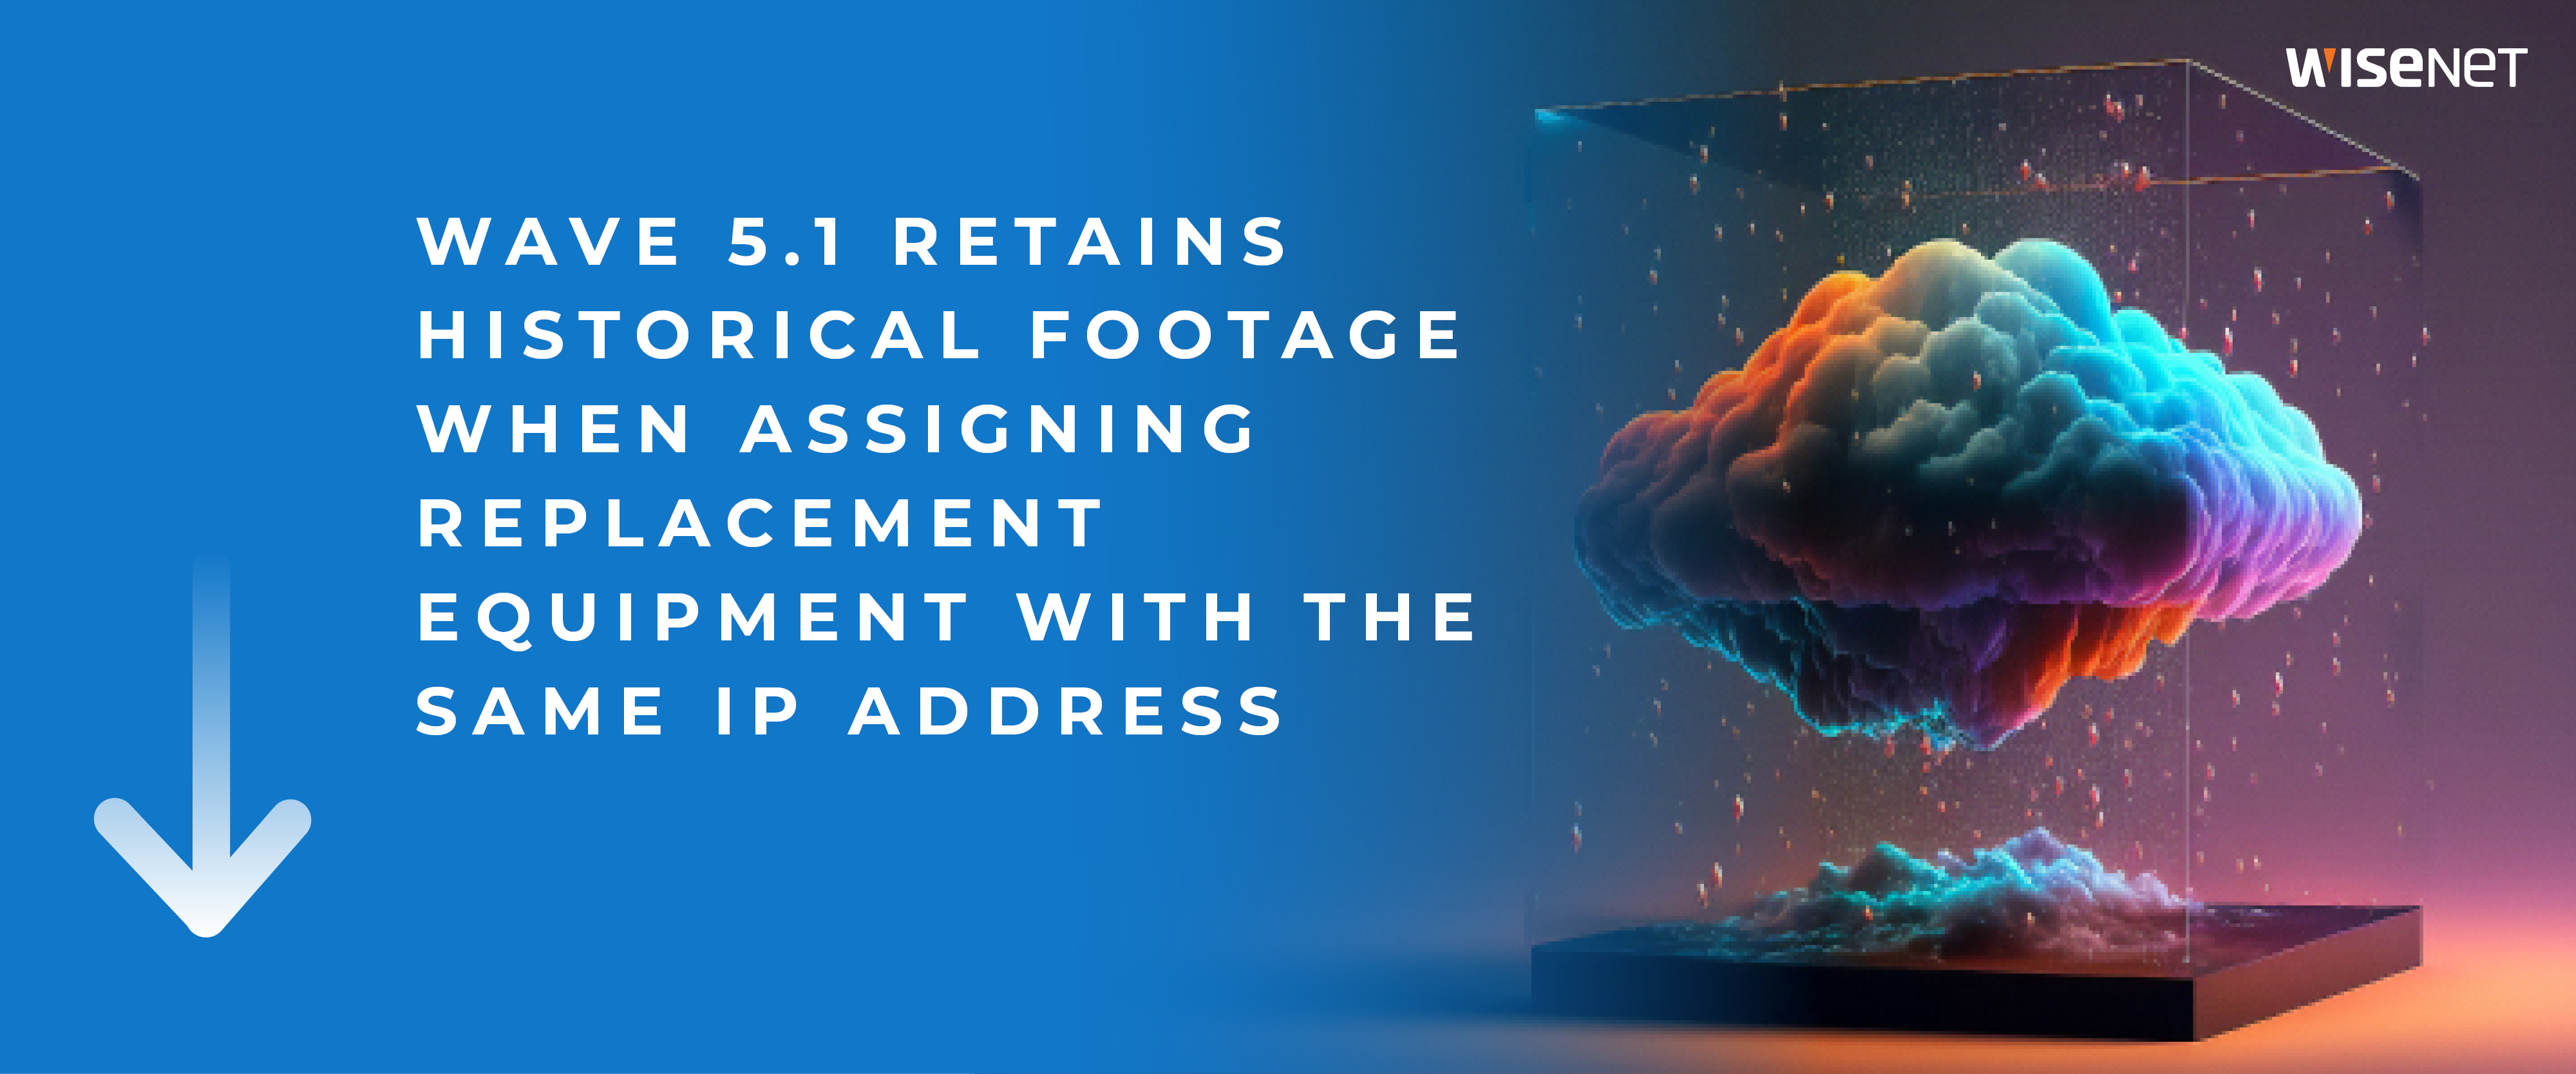 wave 5.1 retains historical footage when assigning replacement equipment with the same IP address